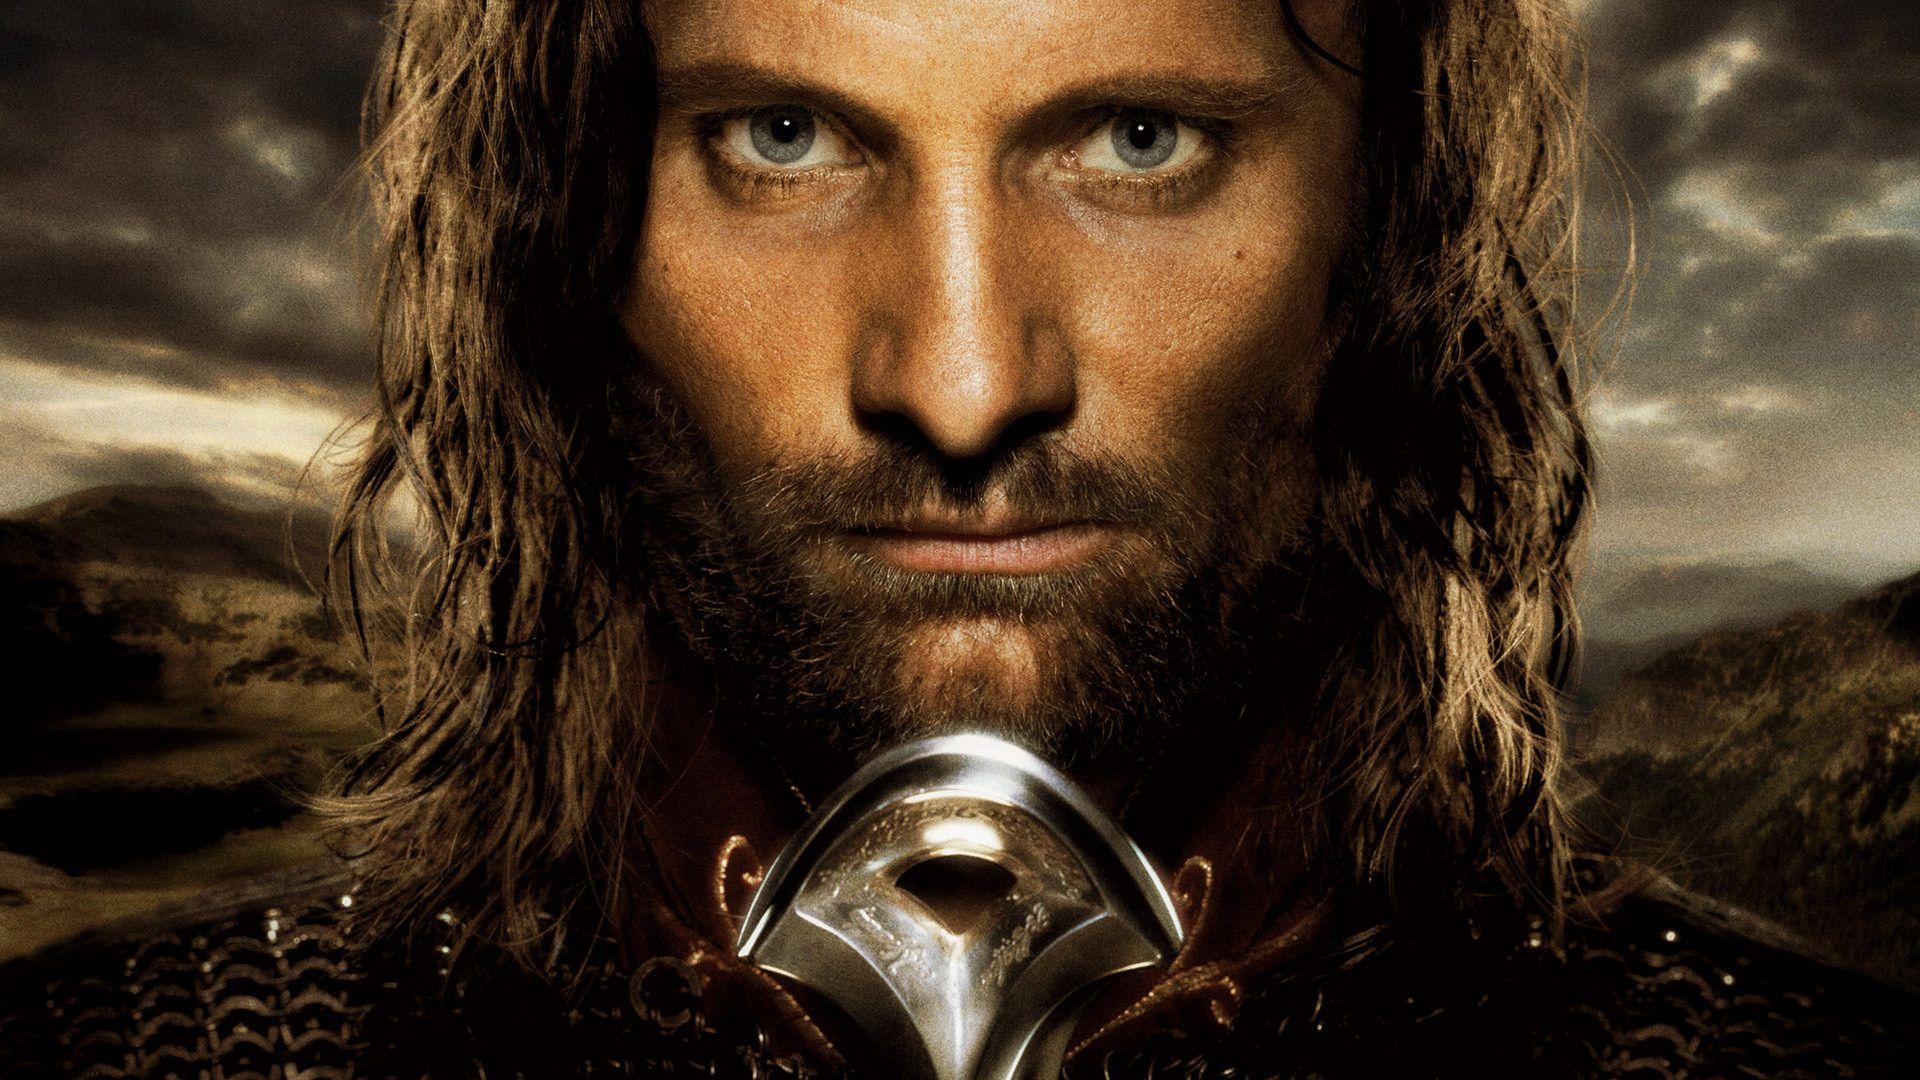 Aragorn The Lord Of The Rings Wallpaper 11 4863 Movies   bwalles 1920x1080